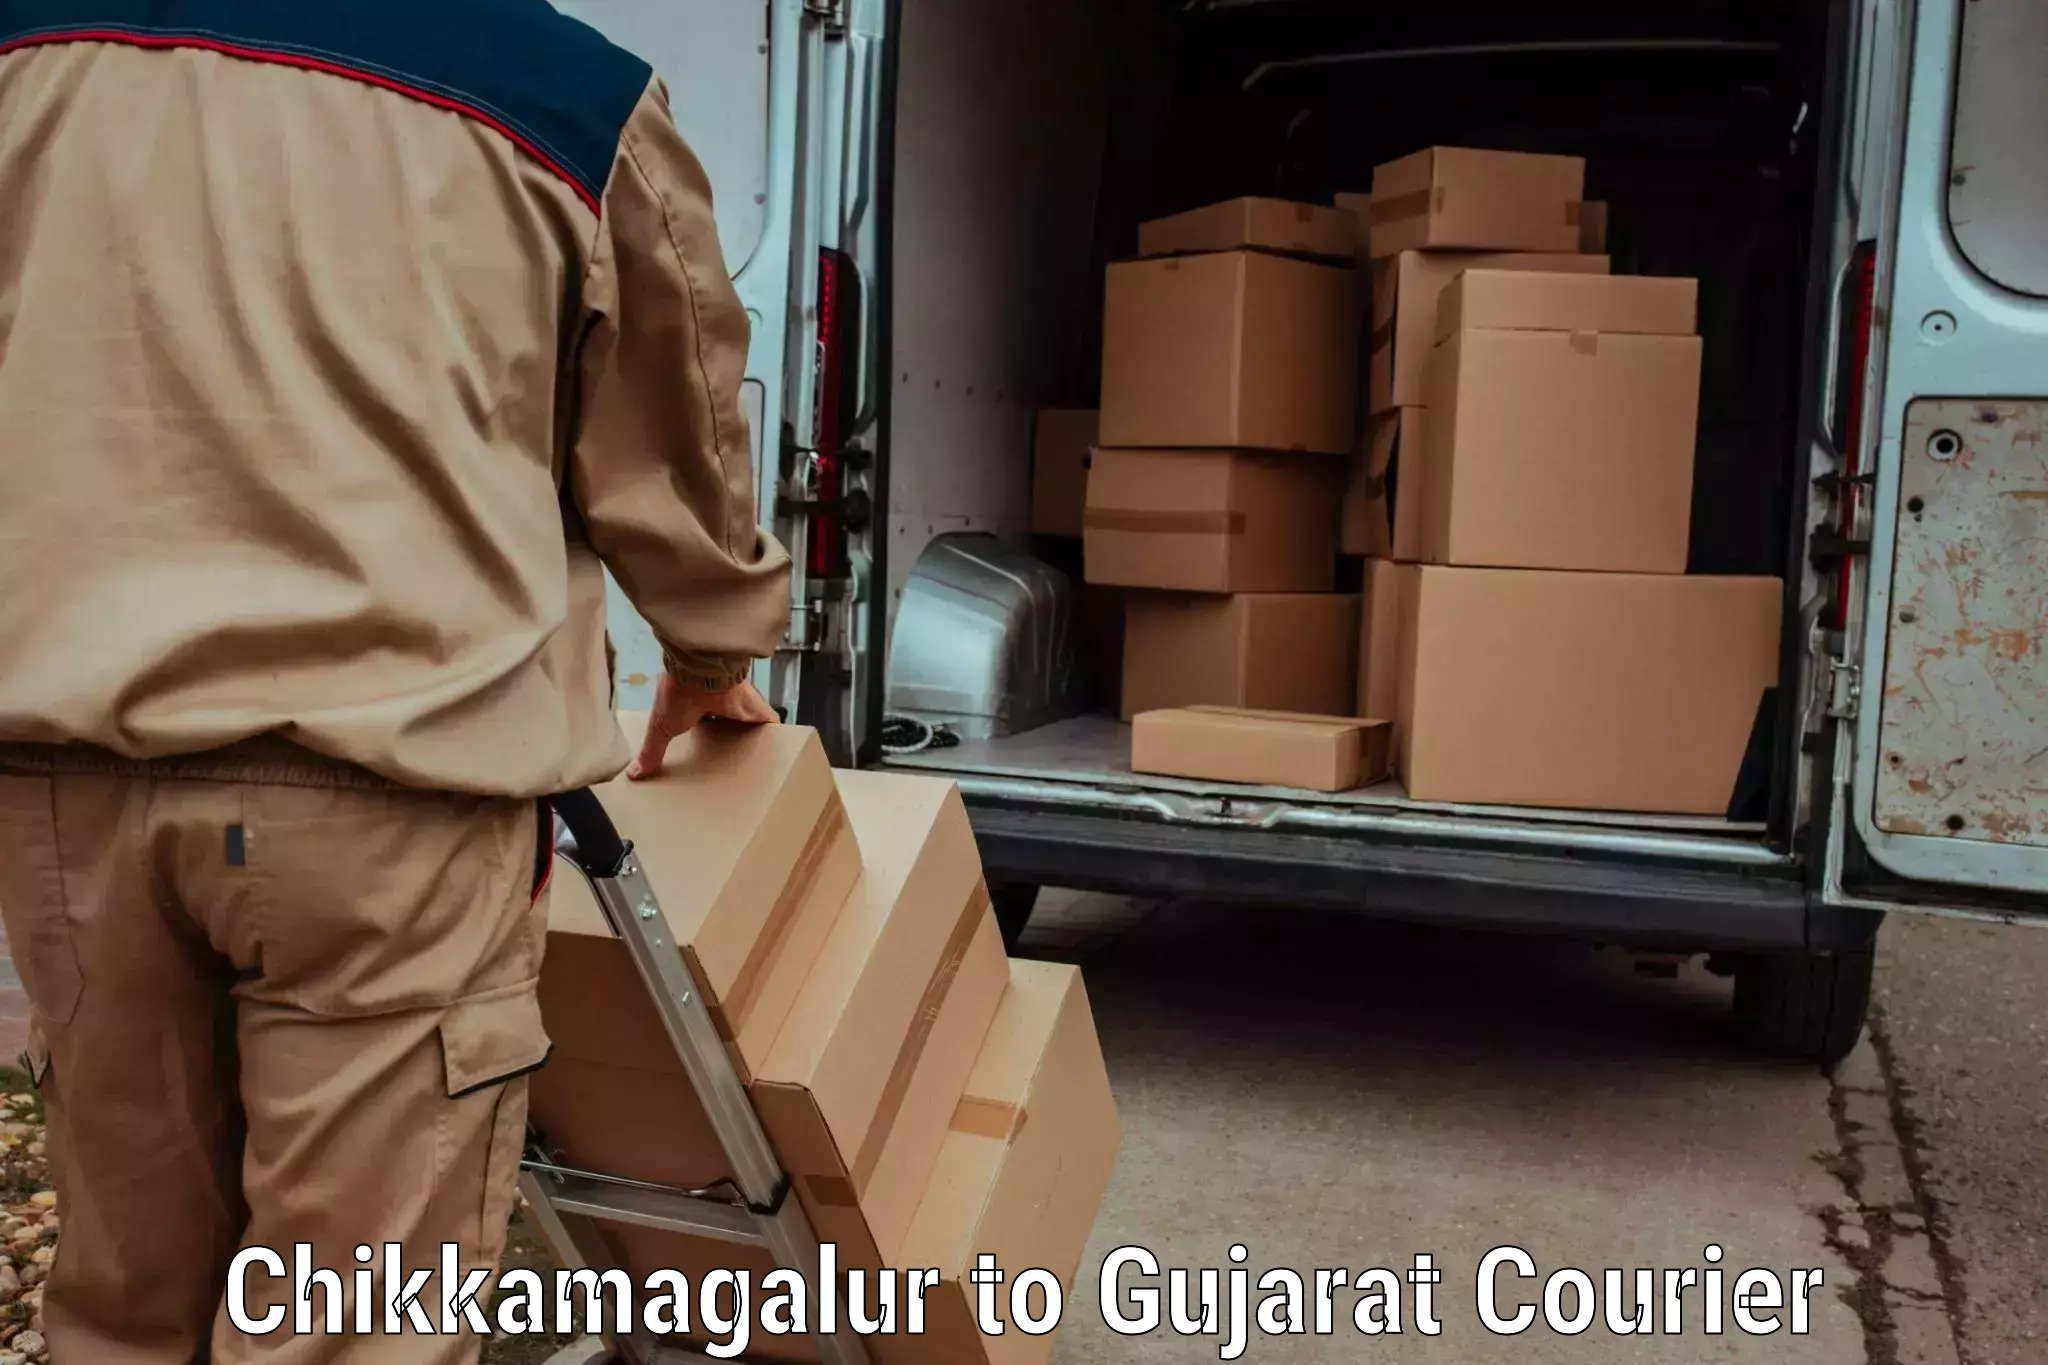 Luggage delivery app Chikkamagalur to Gujarat